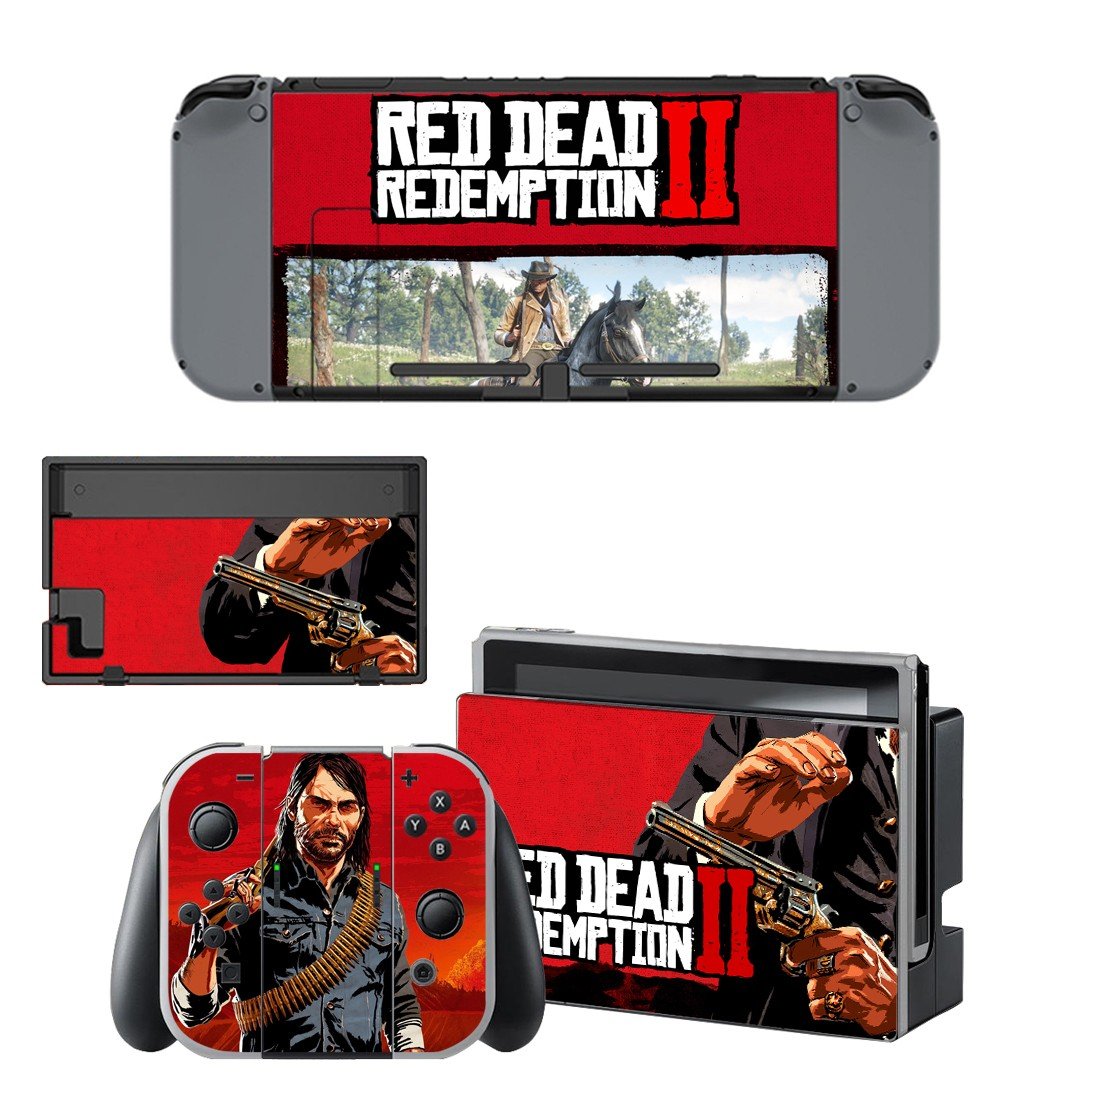 Red Dead Redemption 2 Decal Skin Sticker for Nintendo Switch